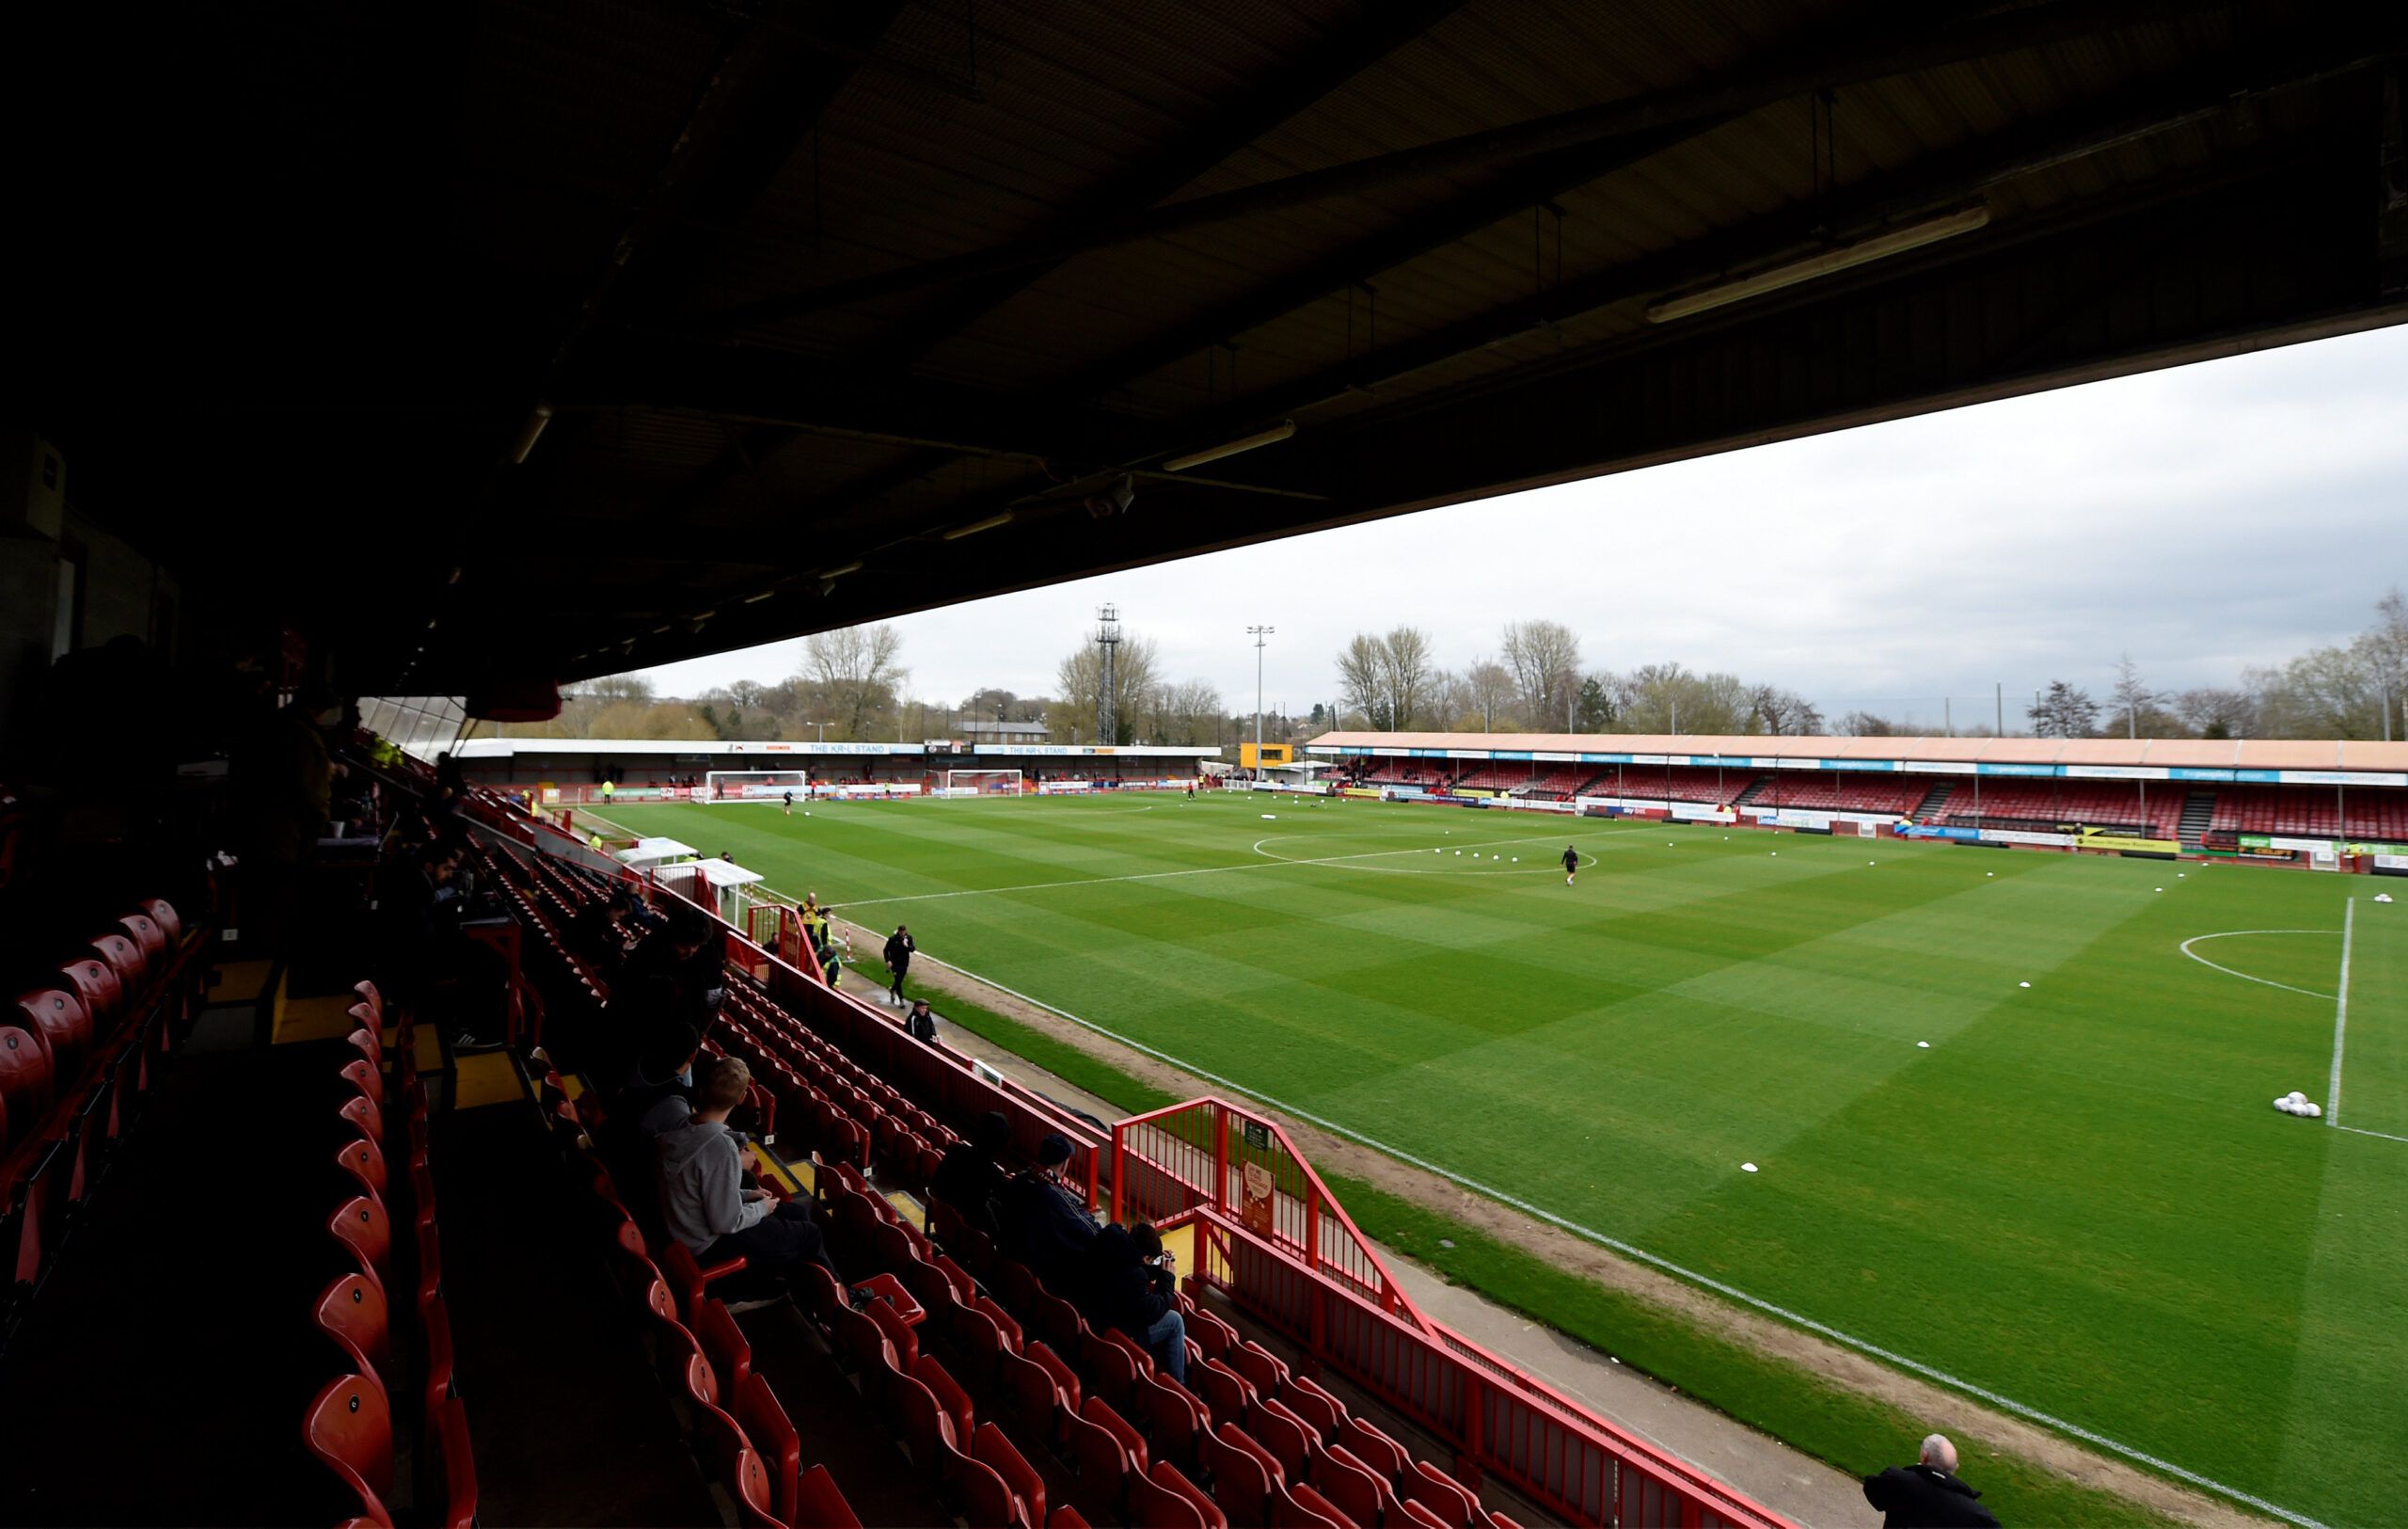 Soccer Football - League Two - Crawley Town v Lincoln City - Broadfield Stadium, Crawley, Britain - March 23, 2019  General view inside the stadium before the match  Action Images/Adam Holt  EDITORIAL USE ONLY. No use with unauthorized audio, video, data, fixture lists, club/league logos or 